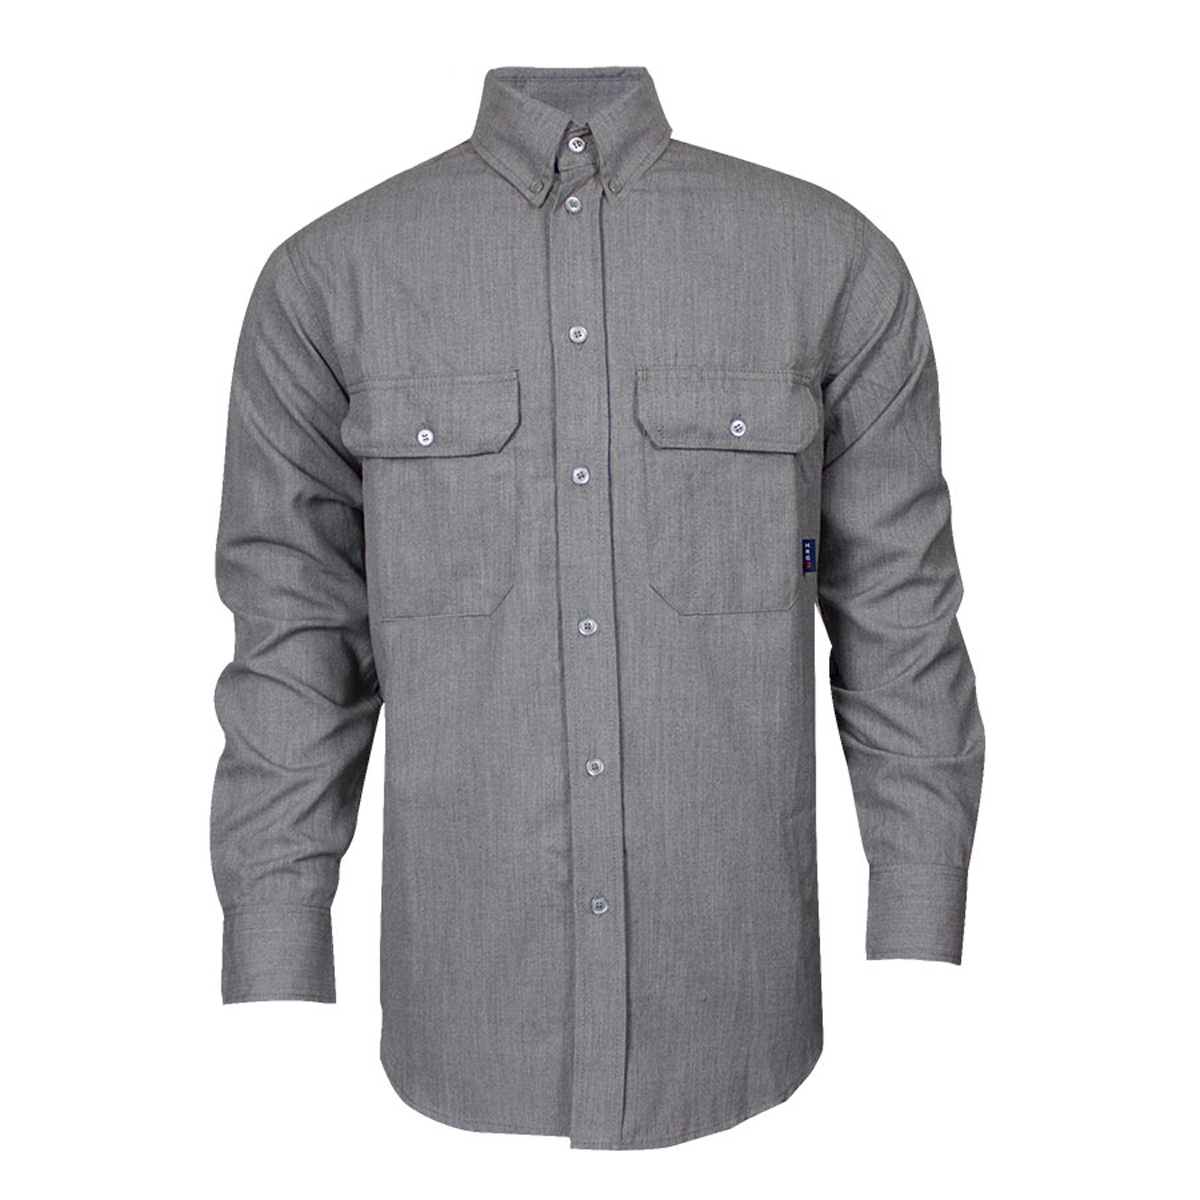 National Safety Apparel 2X Long Gray TECGEN® CC™ OPF Blend Twill Flame Resistant Work Shirt With Button Front Closure